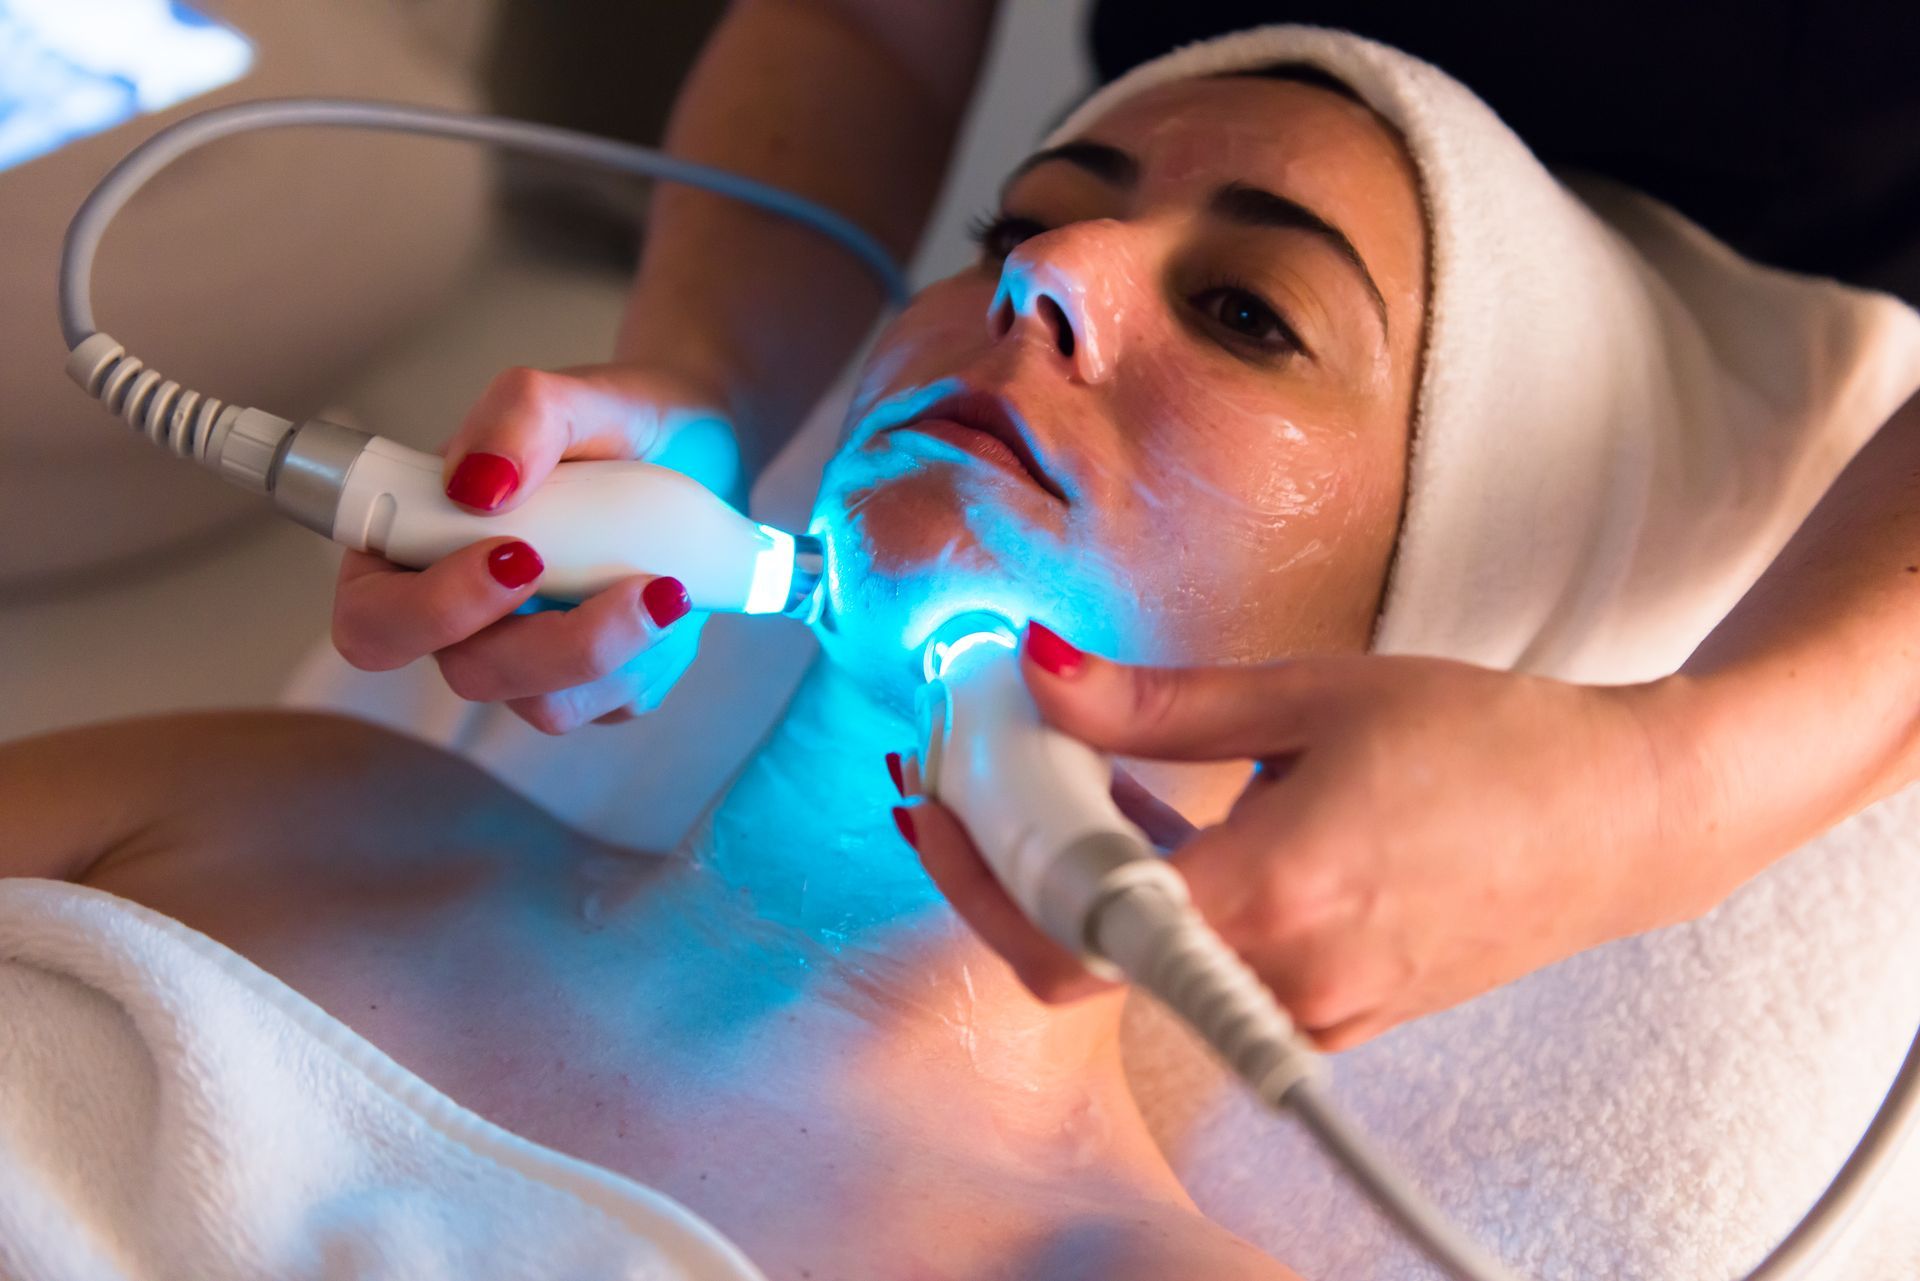 a woman is getting a blue light treatment on her face